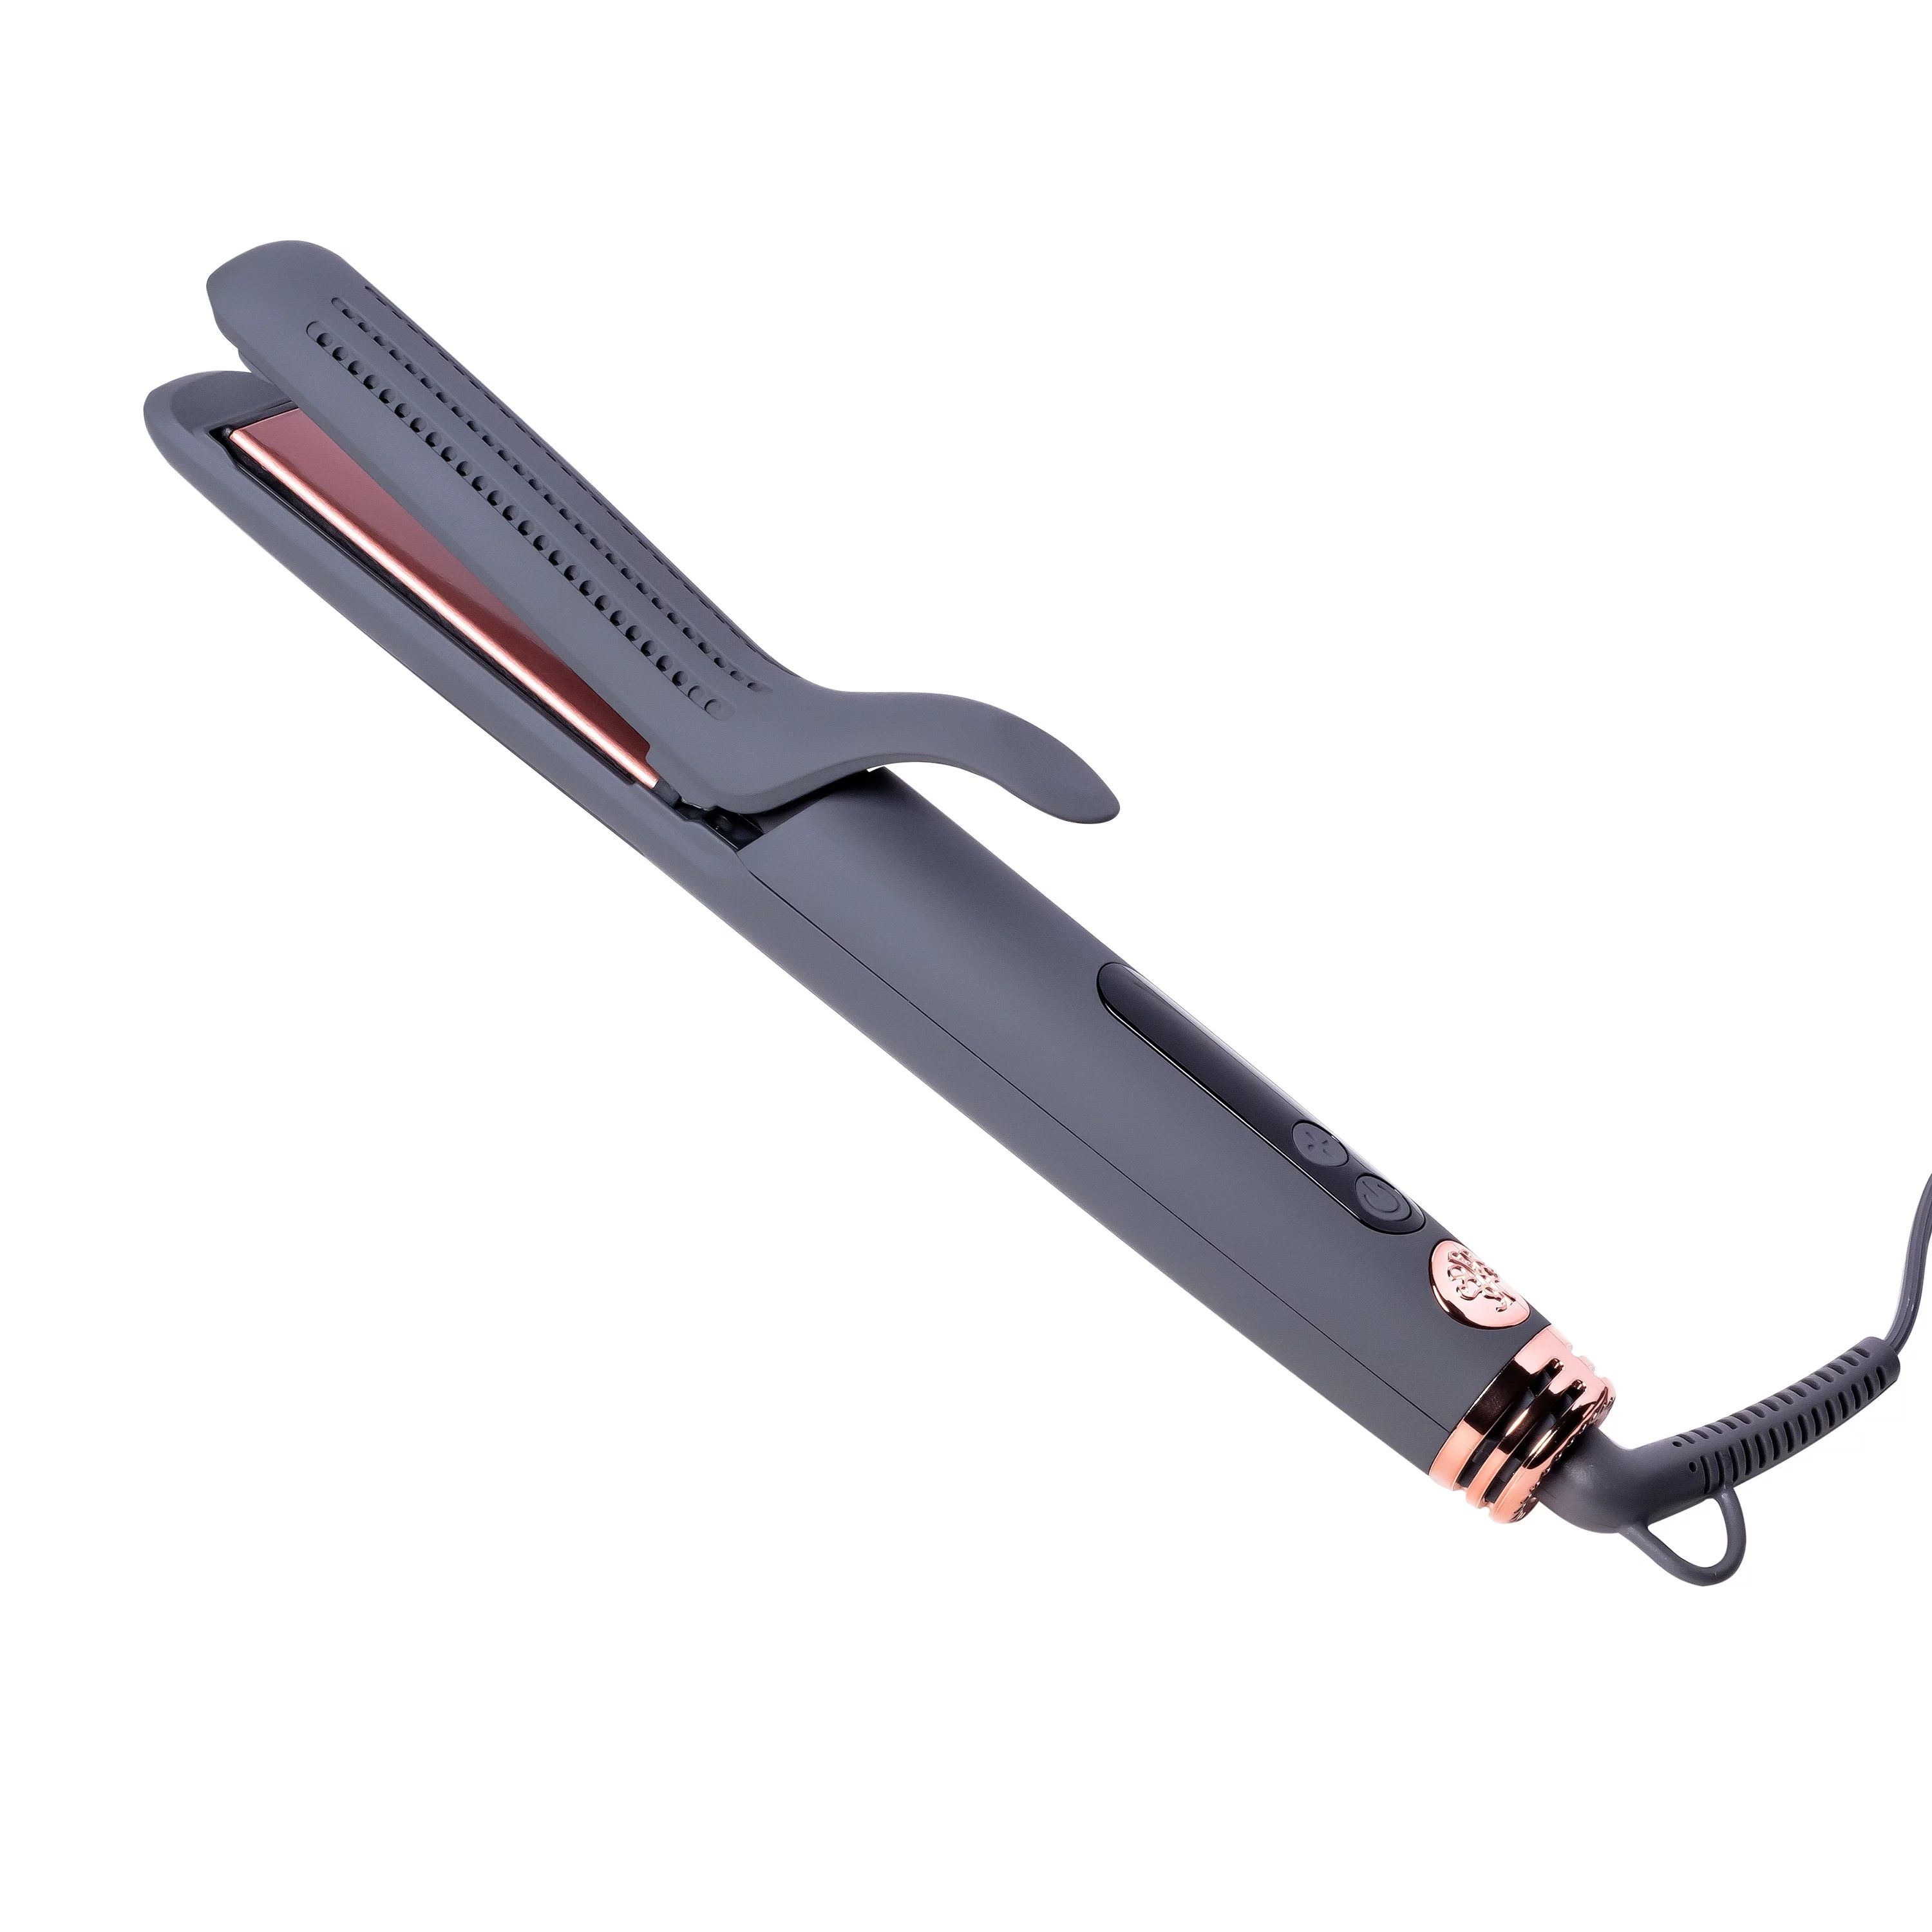 Hairitage 1" Ceramic Tourmaline Hair Straightener and Curling Iron for All Hair Types​ | Walmart (US)